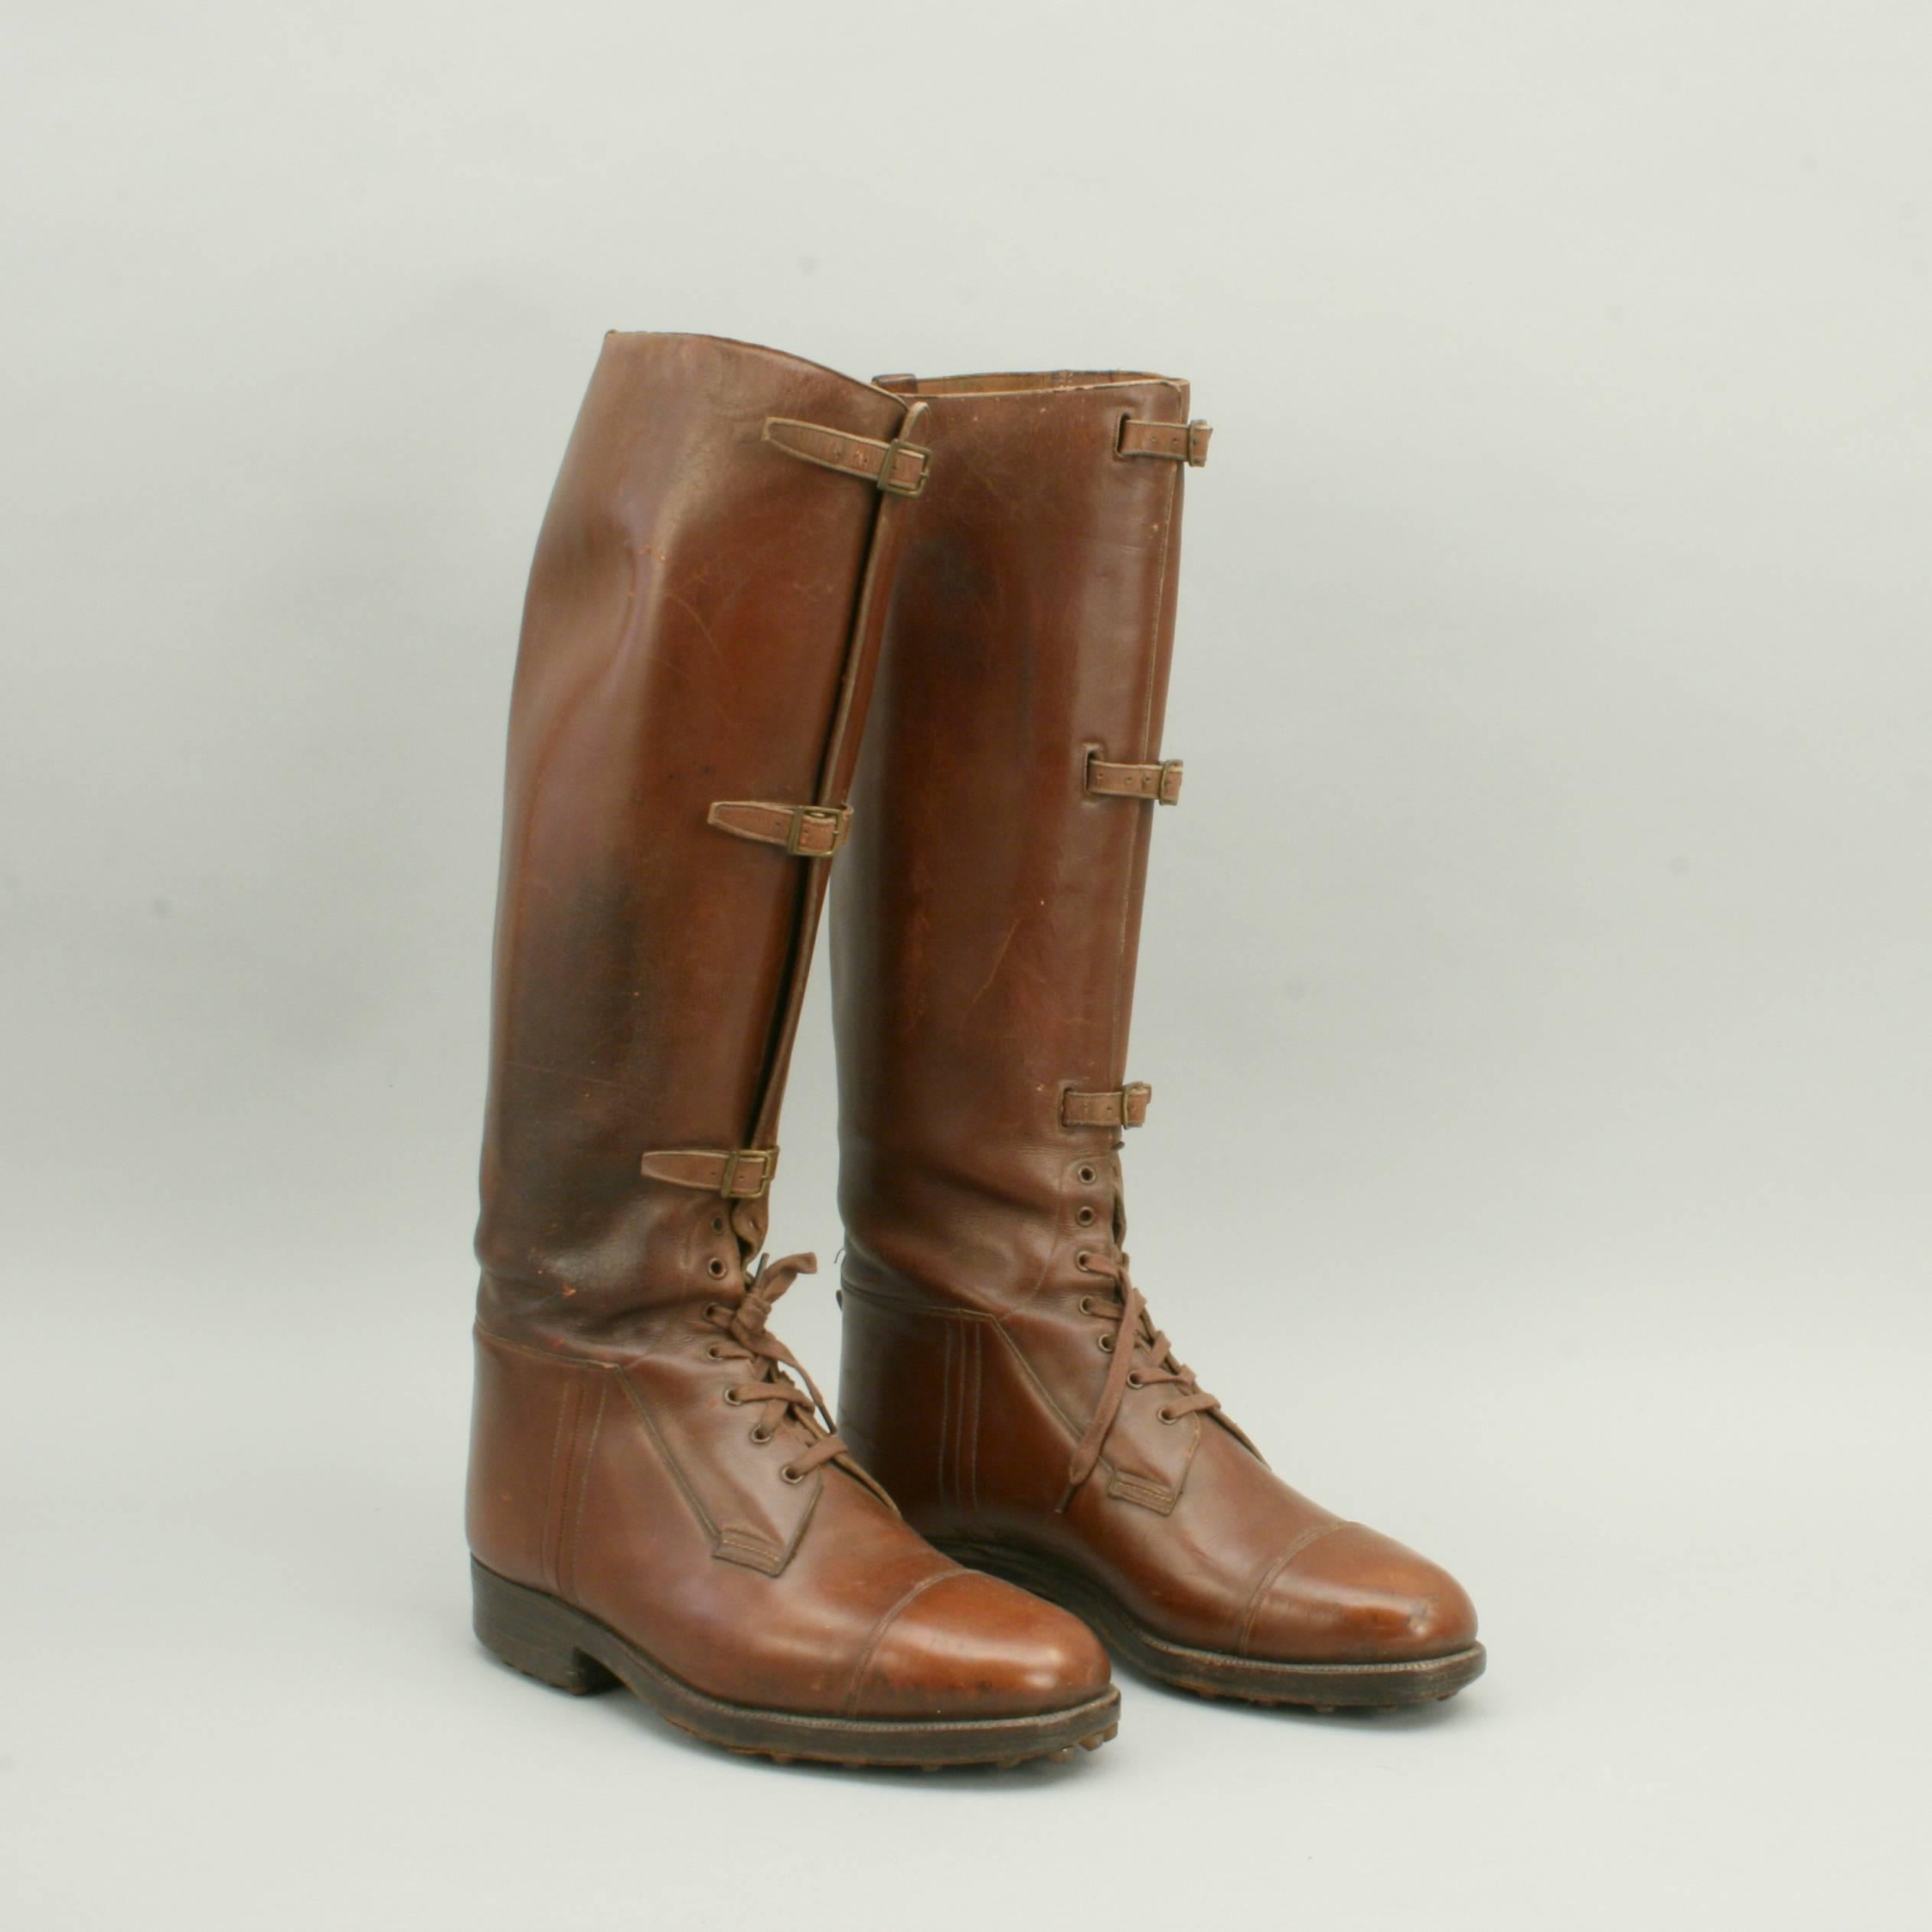 English Antique Brown Leather Field Boots